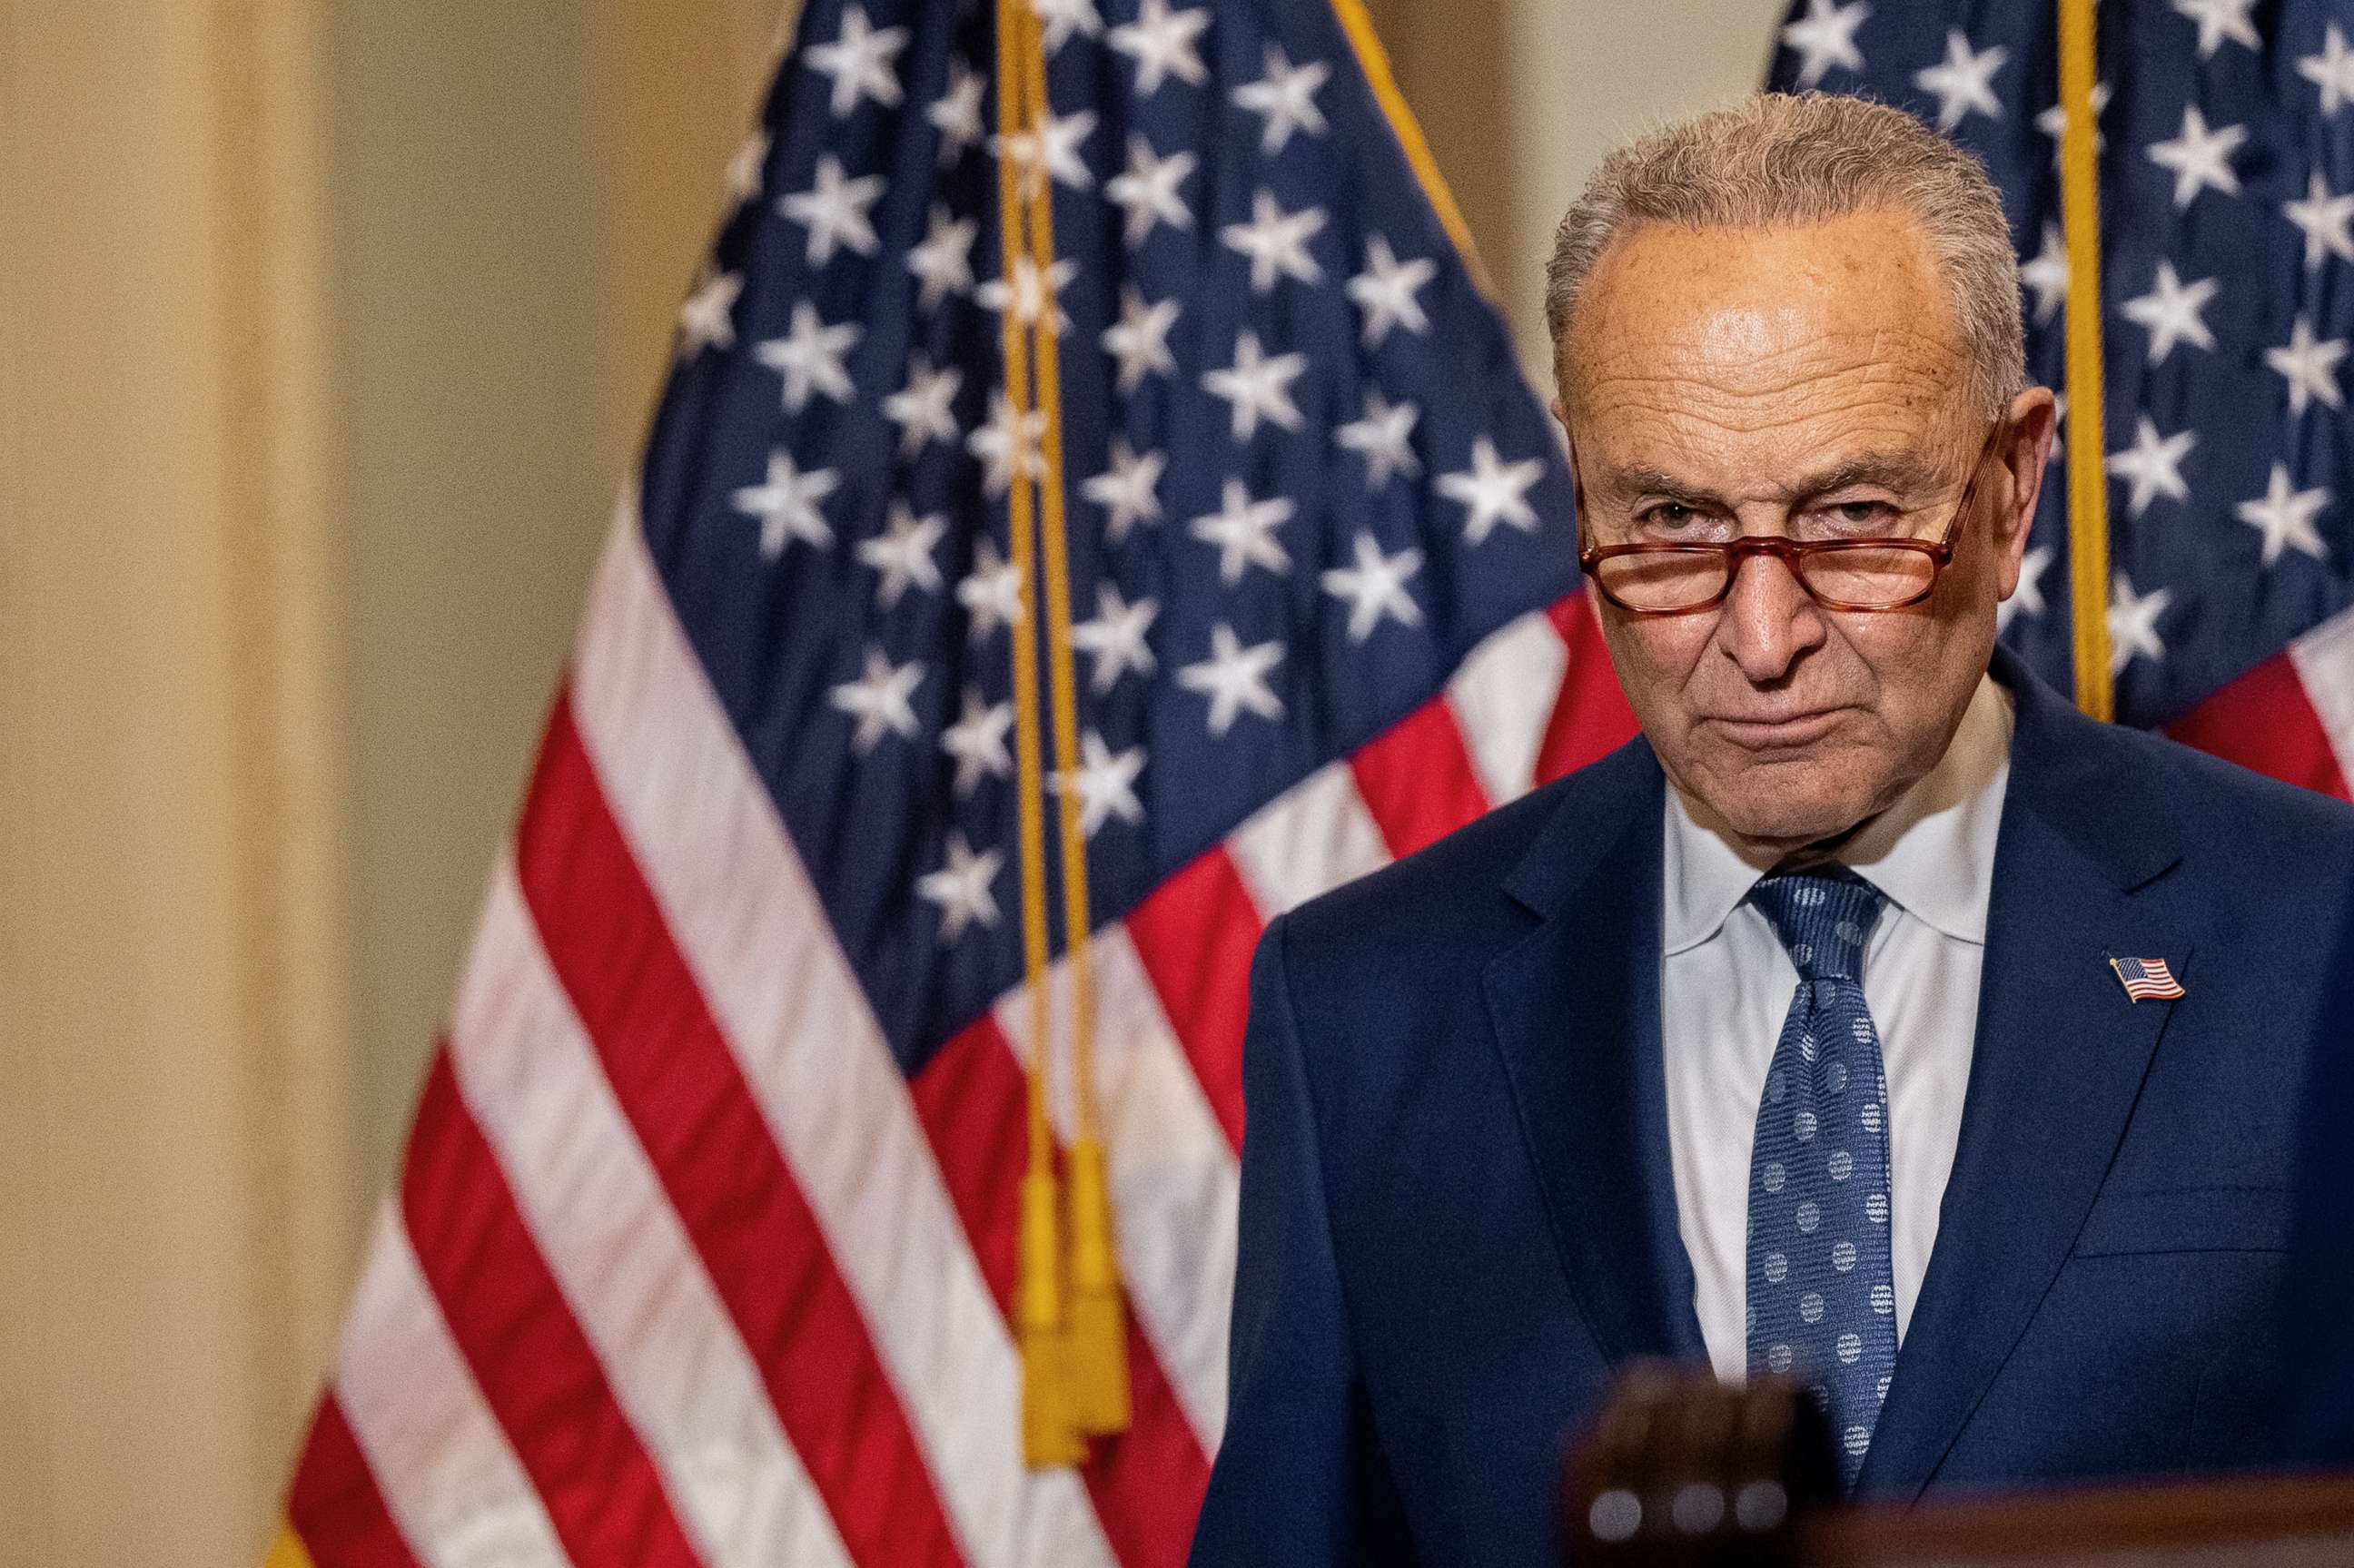 PHOTO: Sen. Majority Leader Chuck Schumer during a news conference, June 22, 2022, in Washington, D.C.